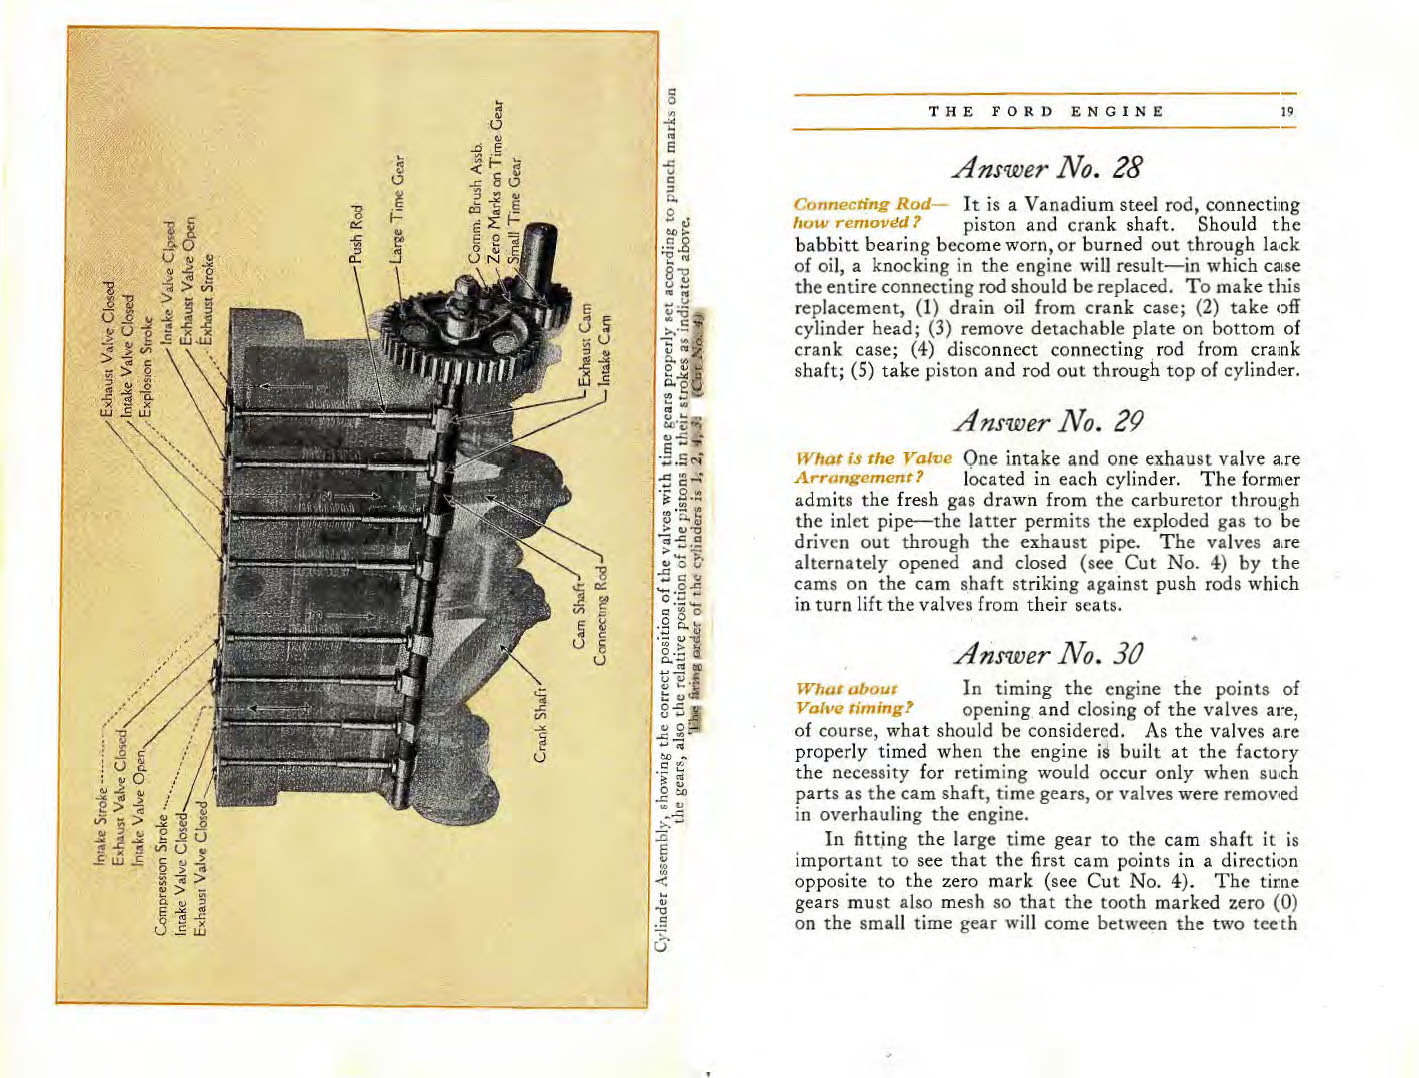 1915_Ford_Owners_Manual-18-19